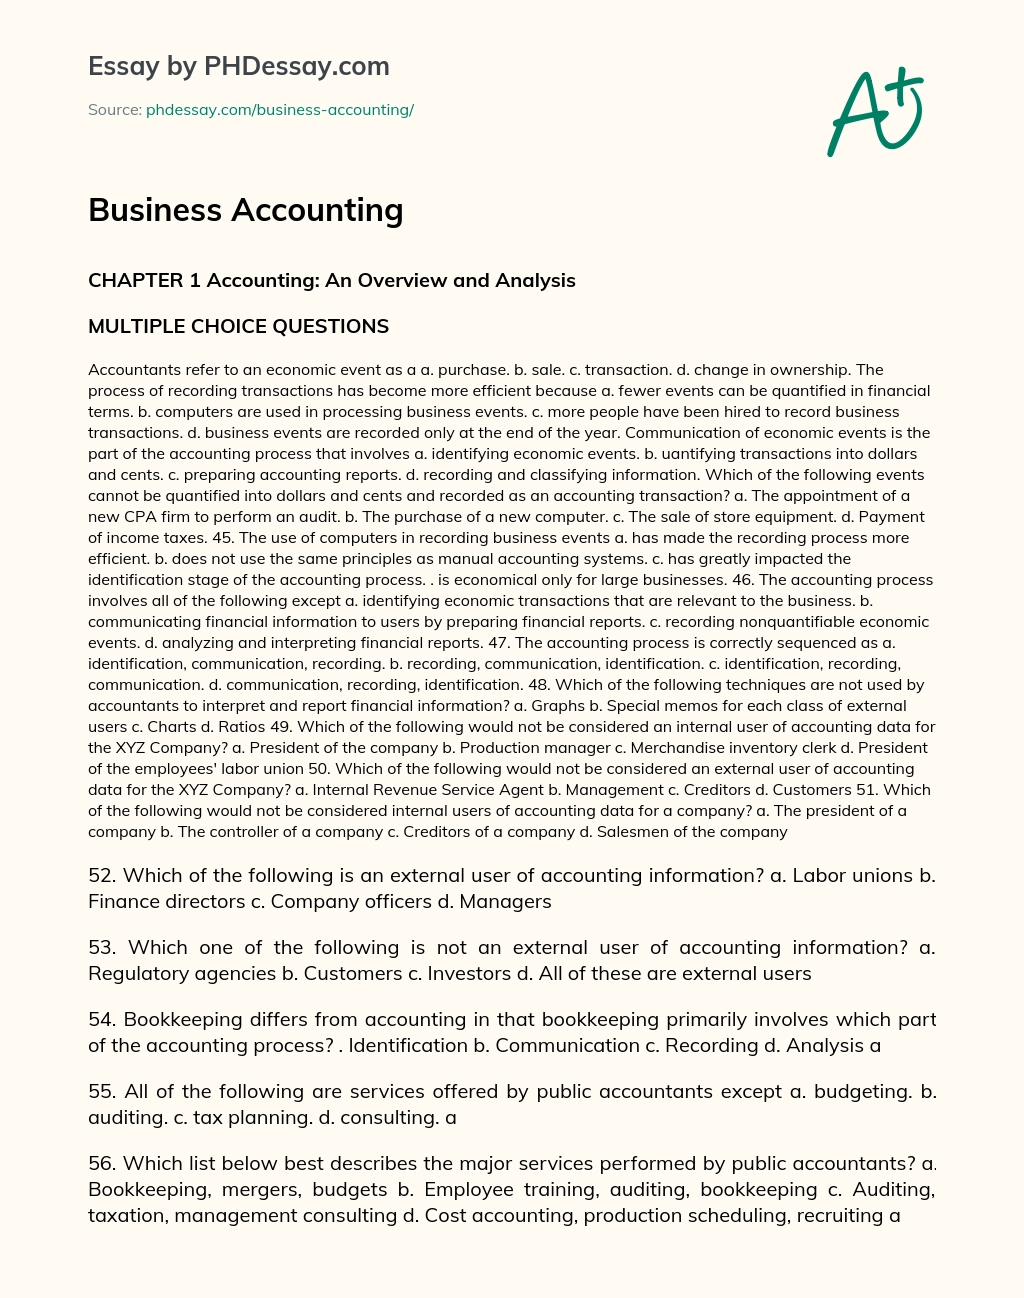 Business Accounting essay